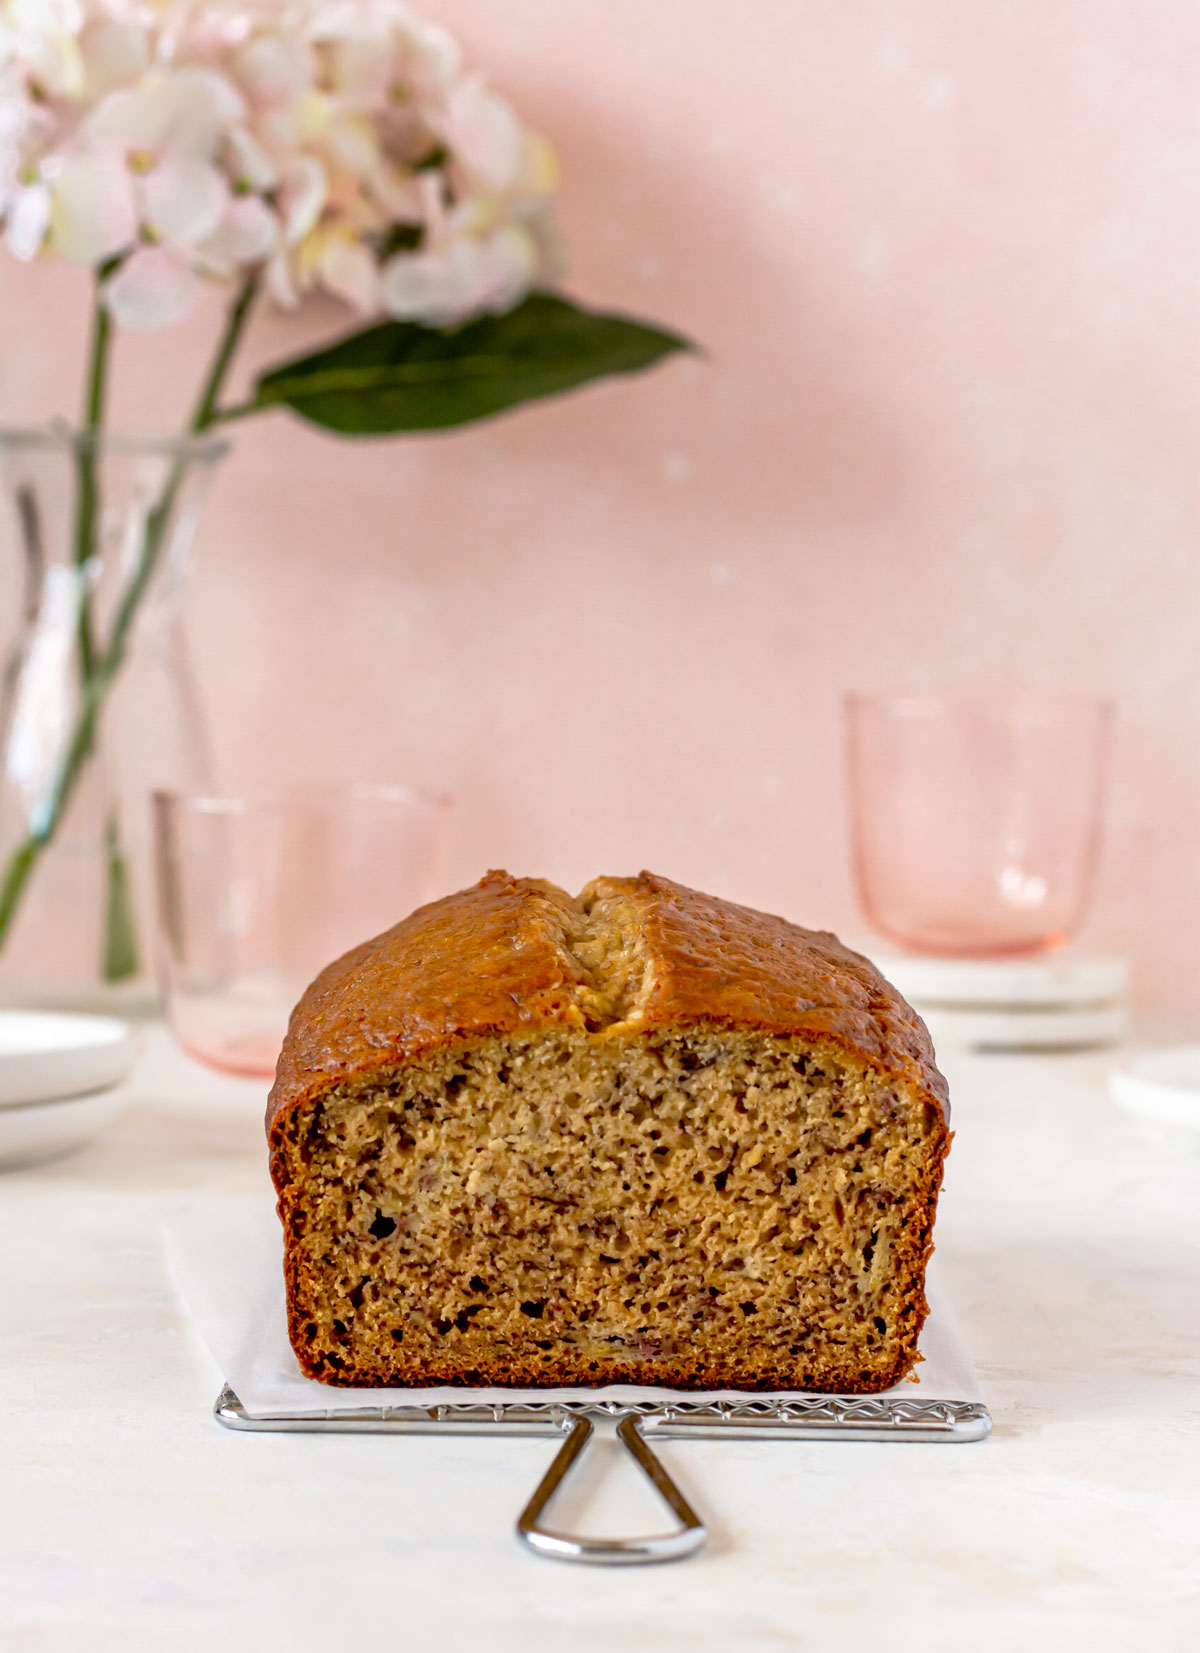 Loaf of banana bread sitting on parchment paper. Cups, flowers and plates in background.